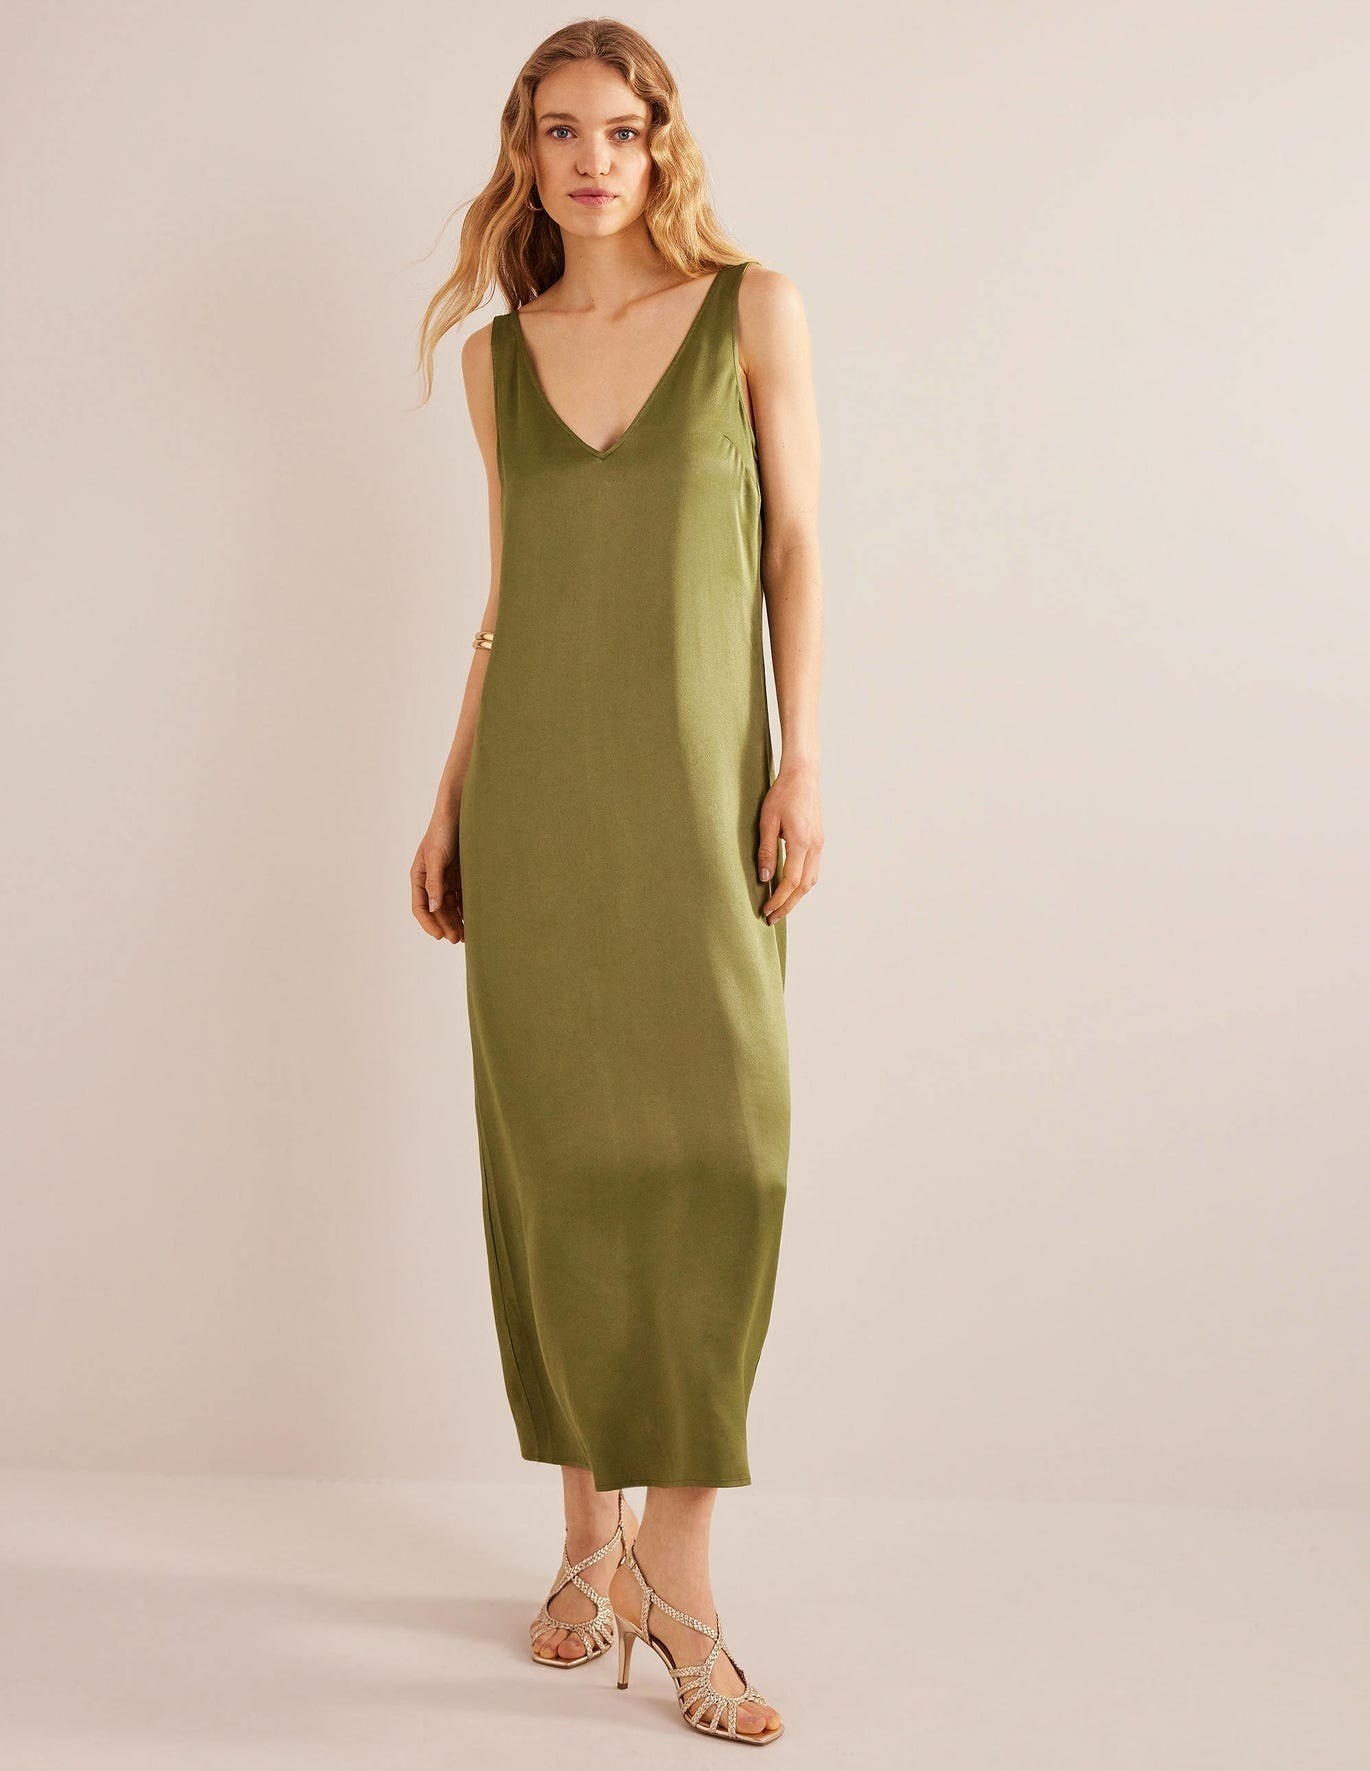 a model wearing the olive green dress